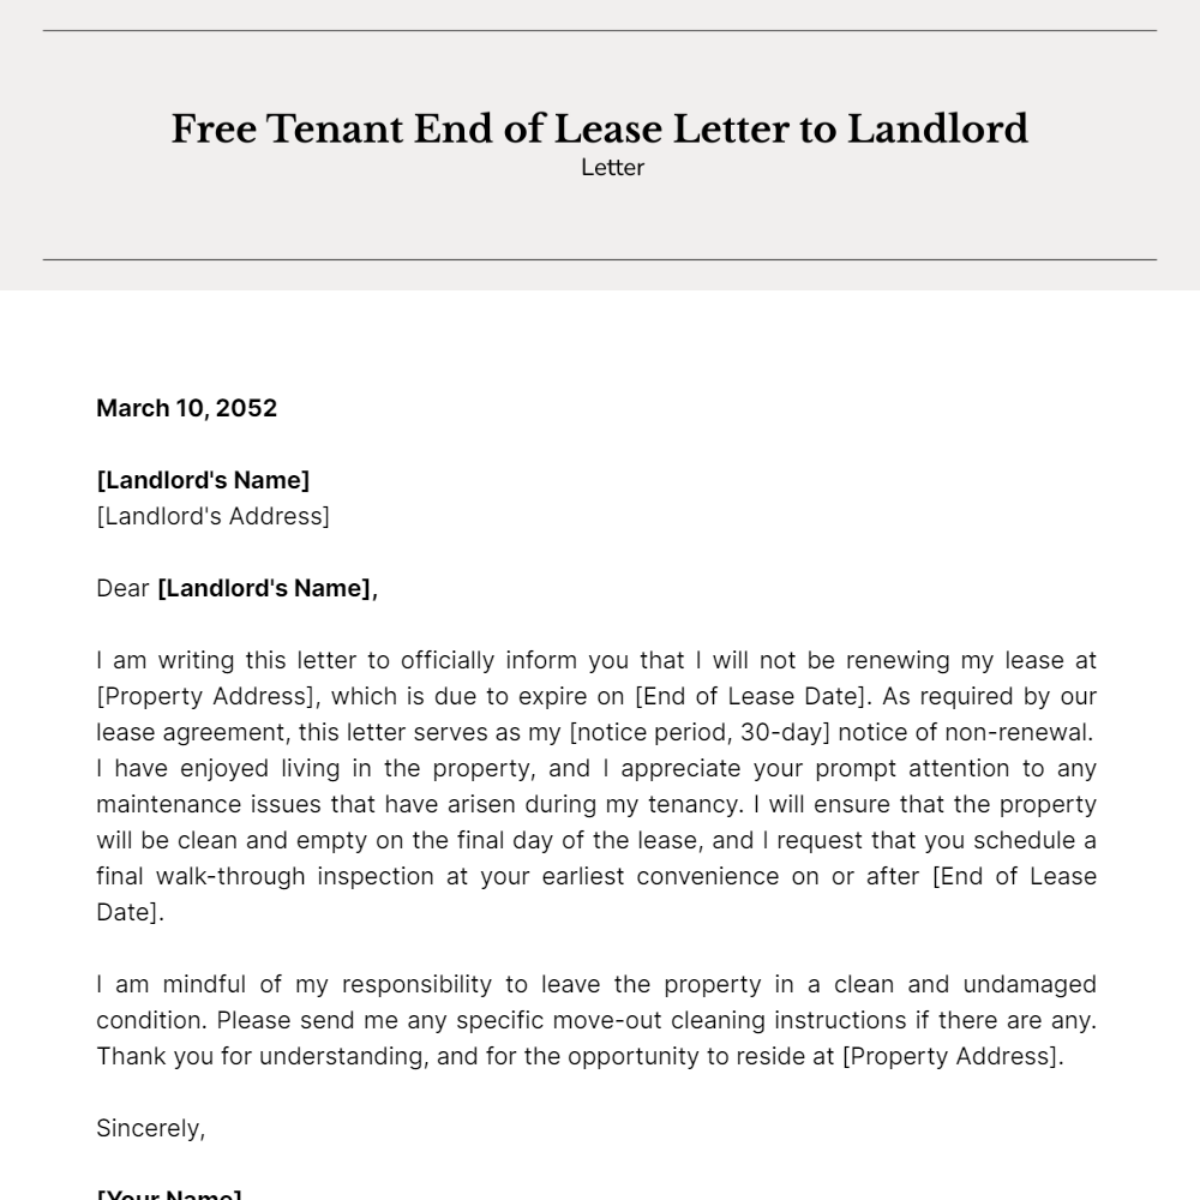 Tenant End of Lease Letter to Landlord Template